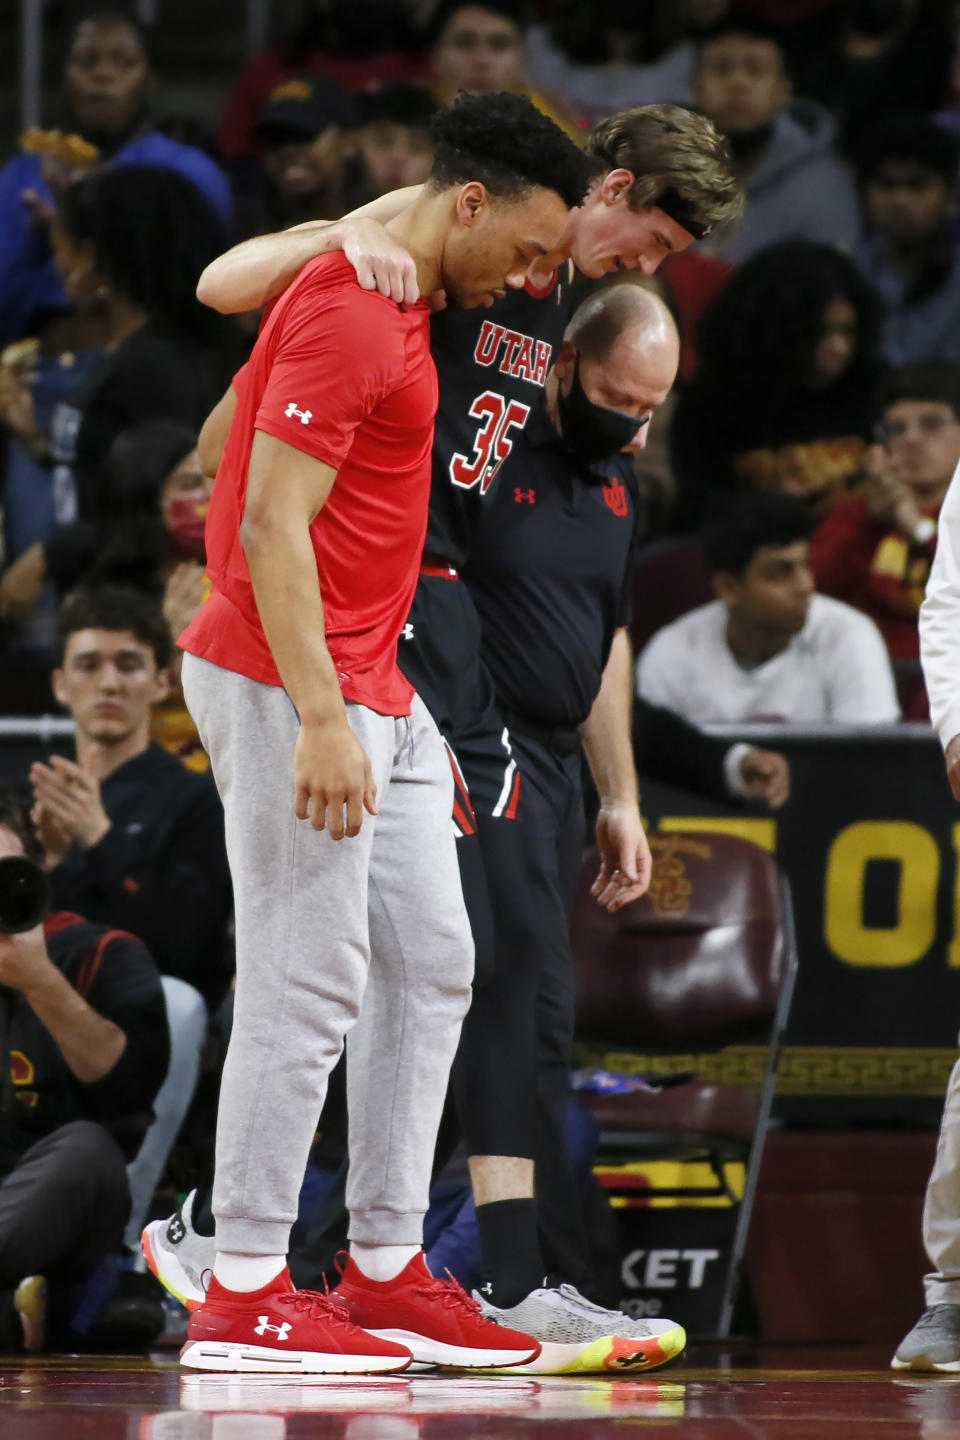 Utah center Branden Carlson (35) is helped off the court during the first half of the team's NCAA college basketball game against Southern California in Los Angeles, Wednesday, Dec. 1, 2021. (AP Photo/Alex Gallardo)